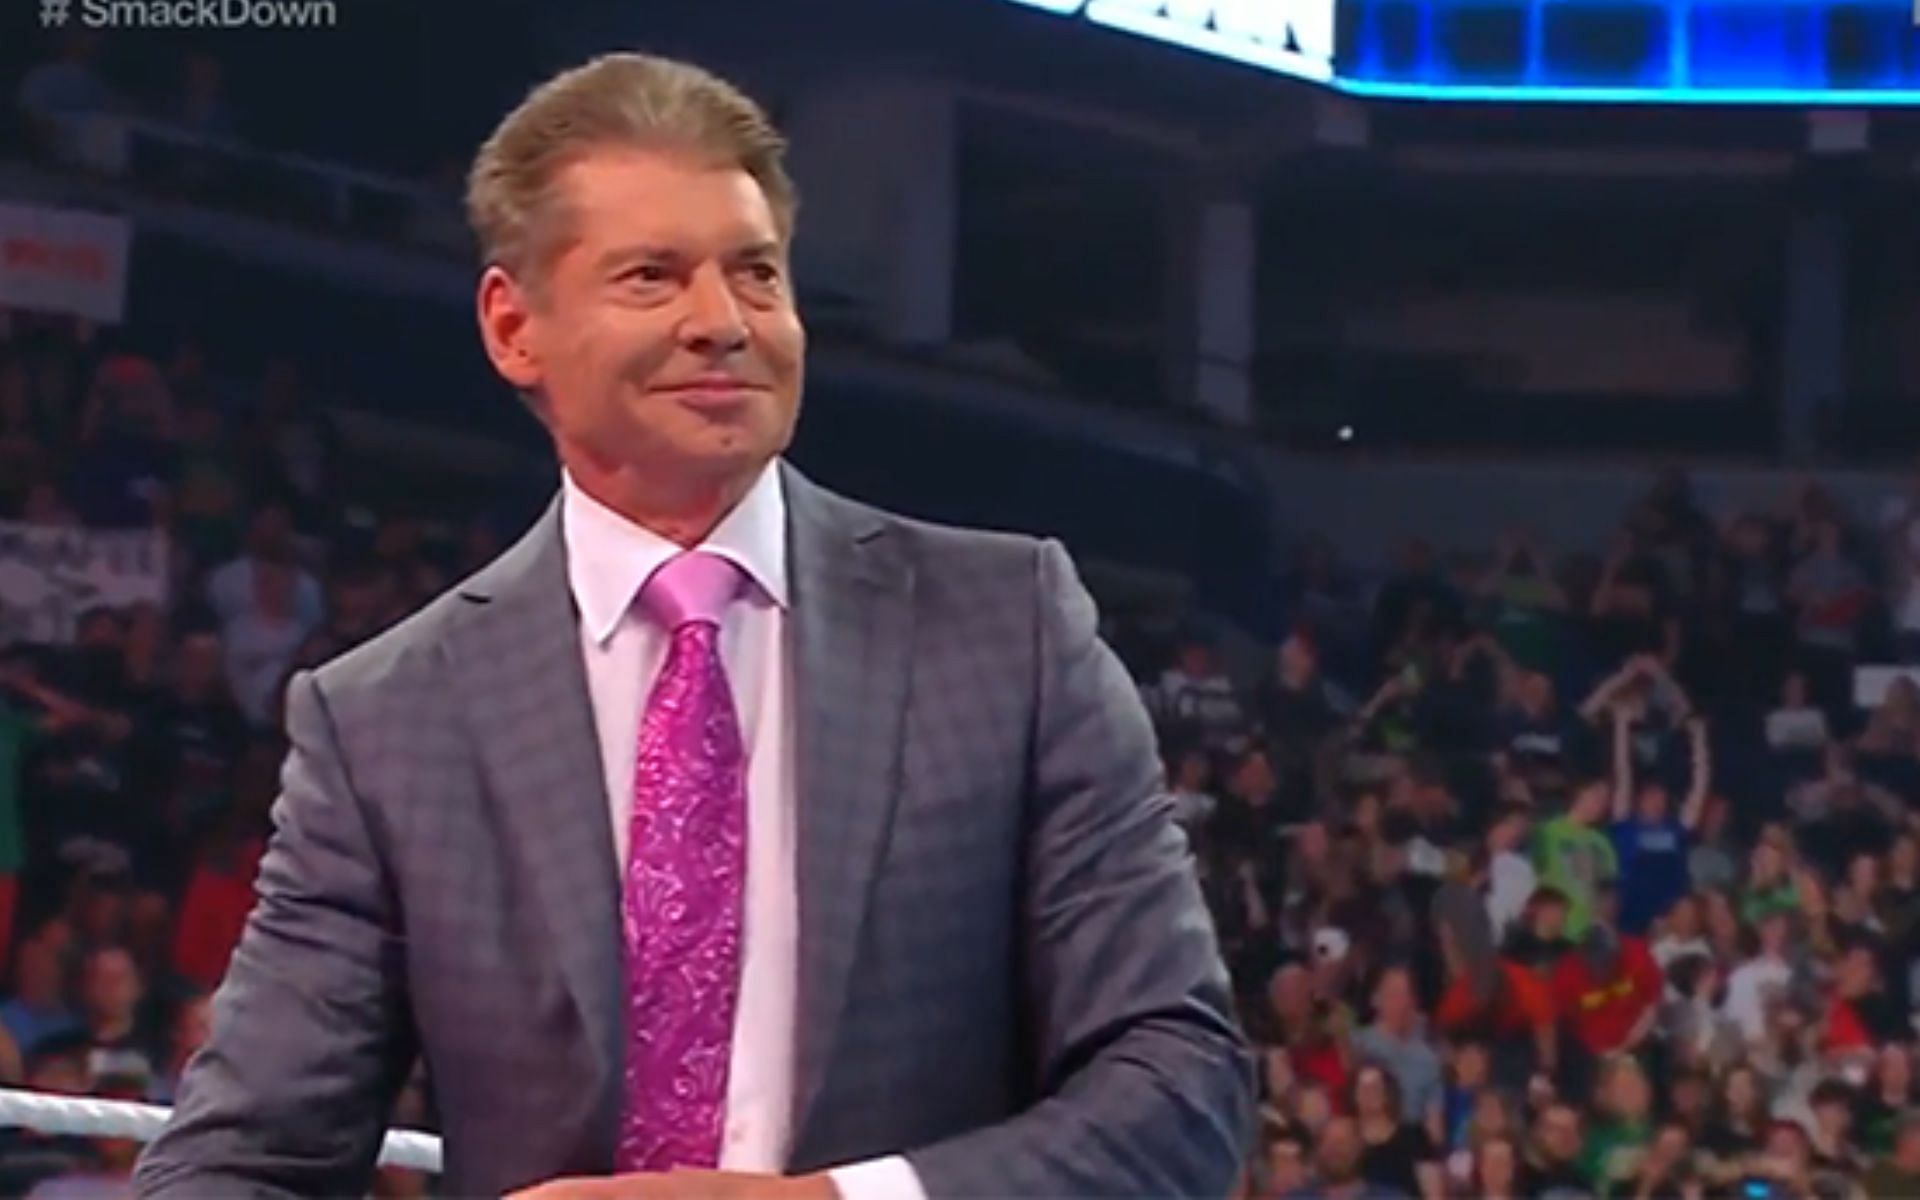 McMahon on his final SmackDown appearance in 2022